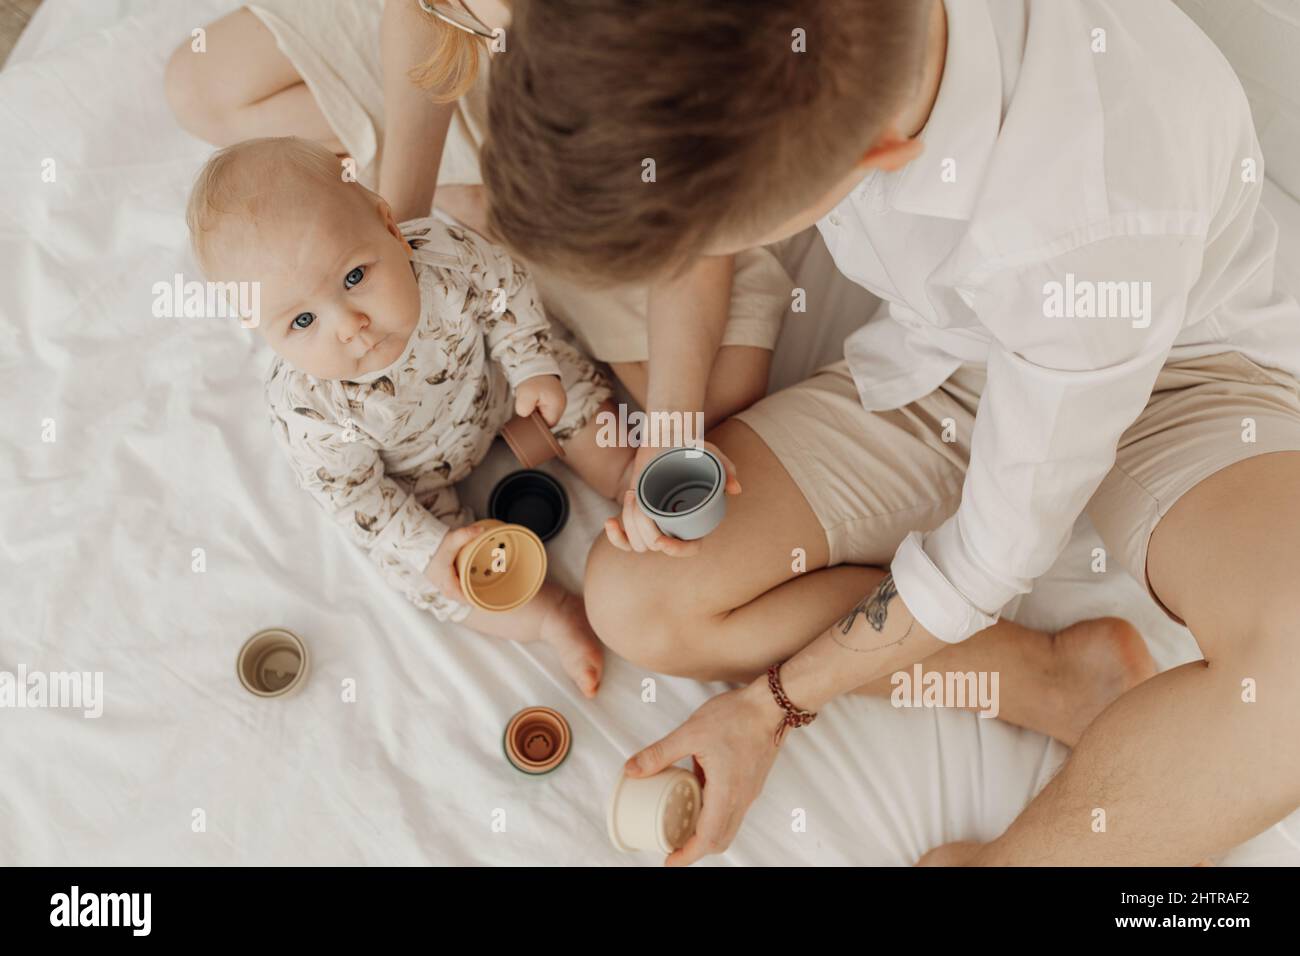 Top view of young man and unrecognizable woman holding silicone bowls of different size with little plump infant baby. Stock Photo